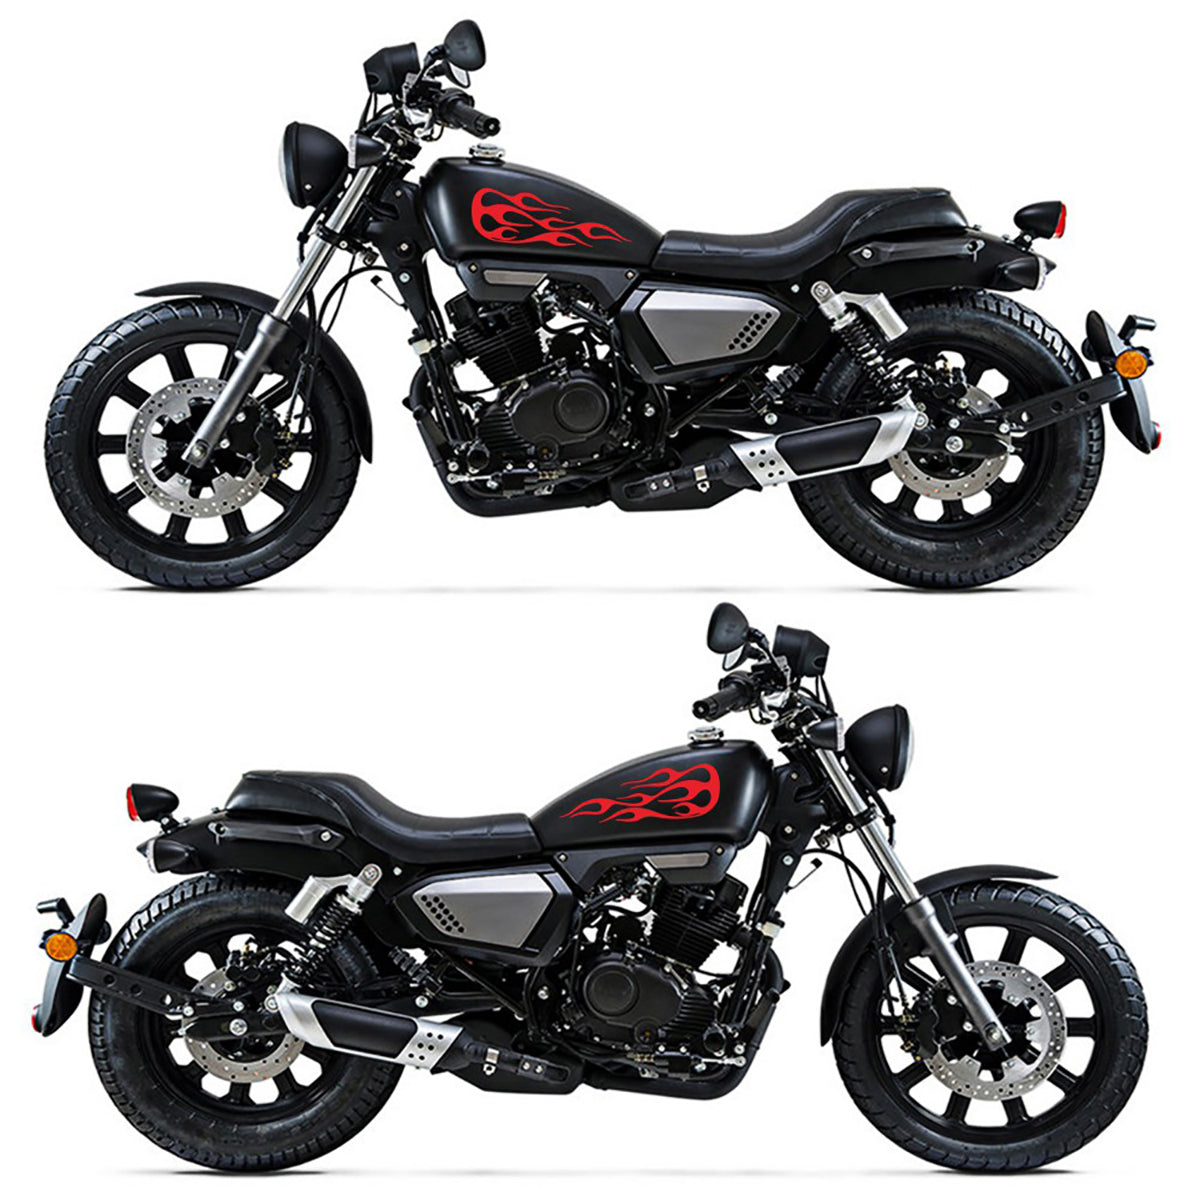 Black 2pcs Flame Badge Decal Car Motorcycle Gas Tank Decorative Stickers 13.9x5.1 Inch Universal